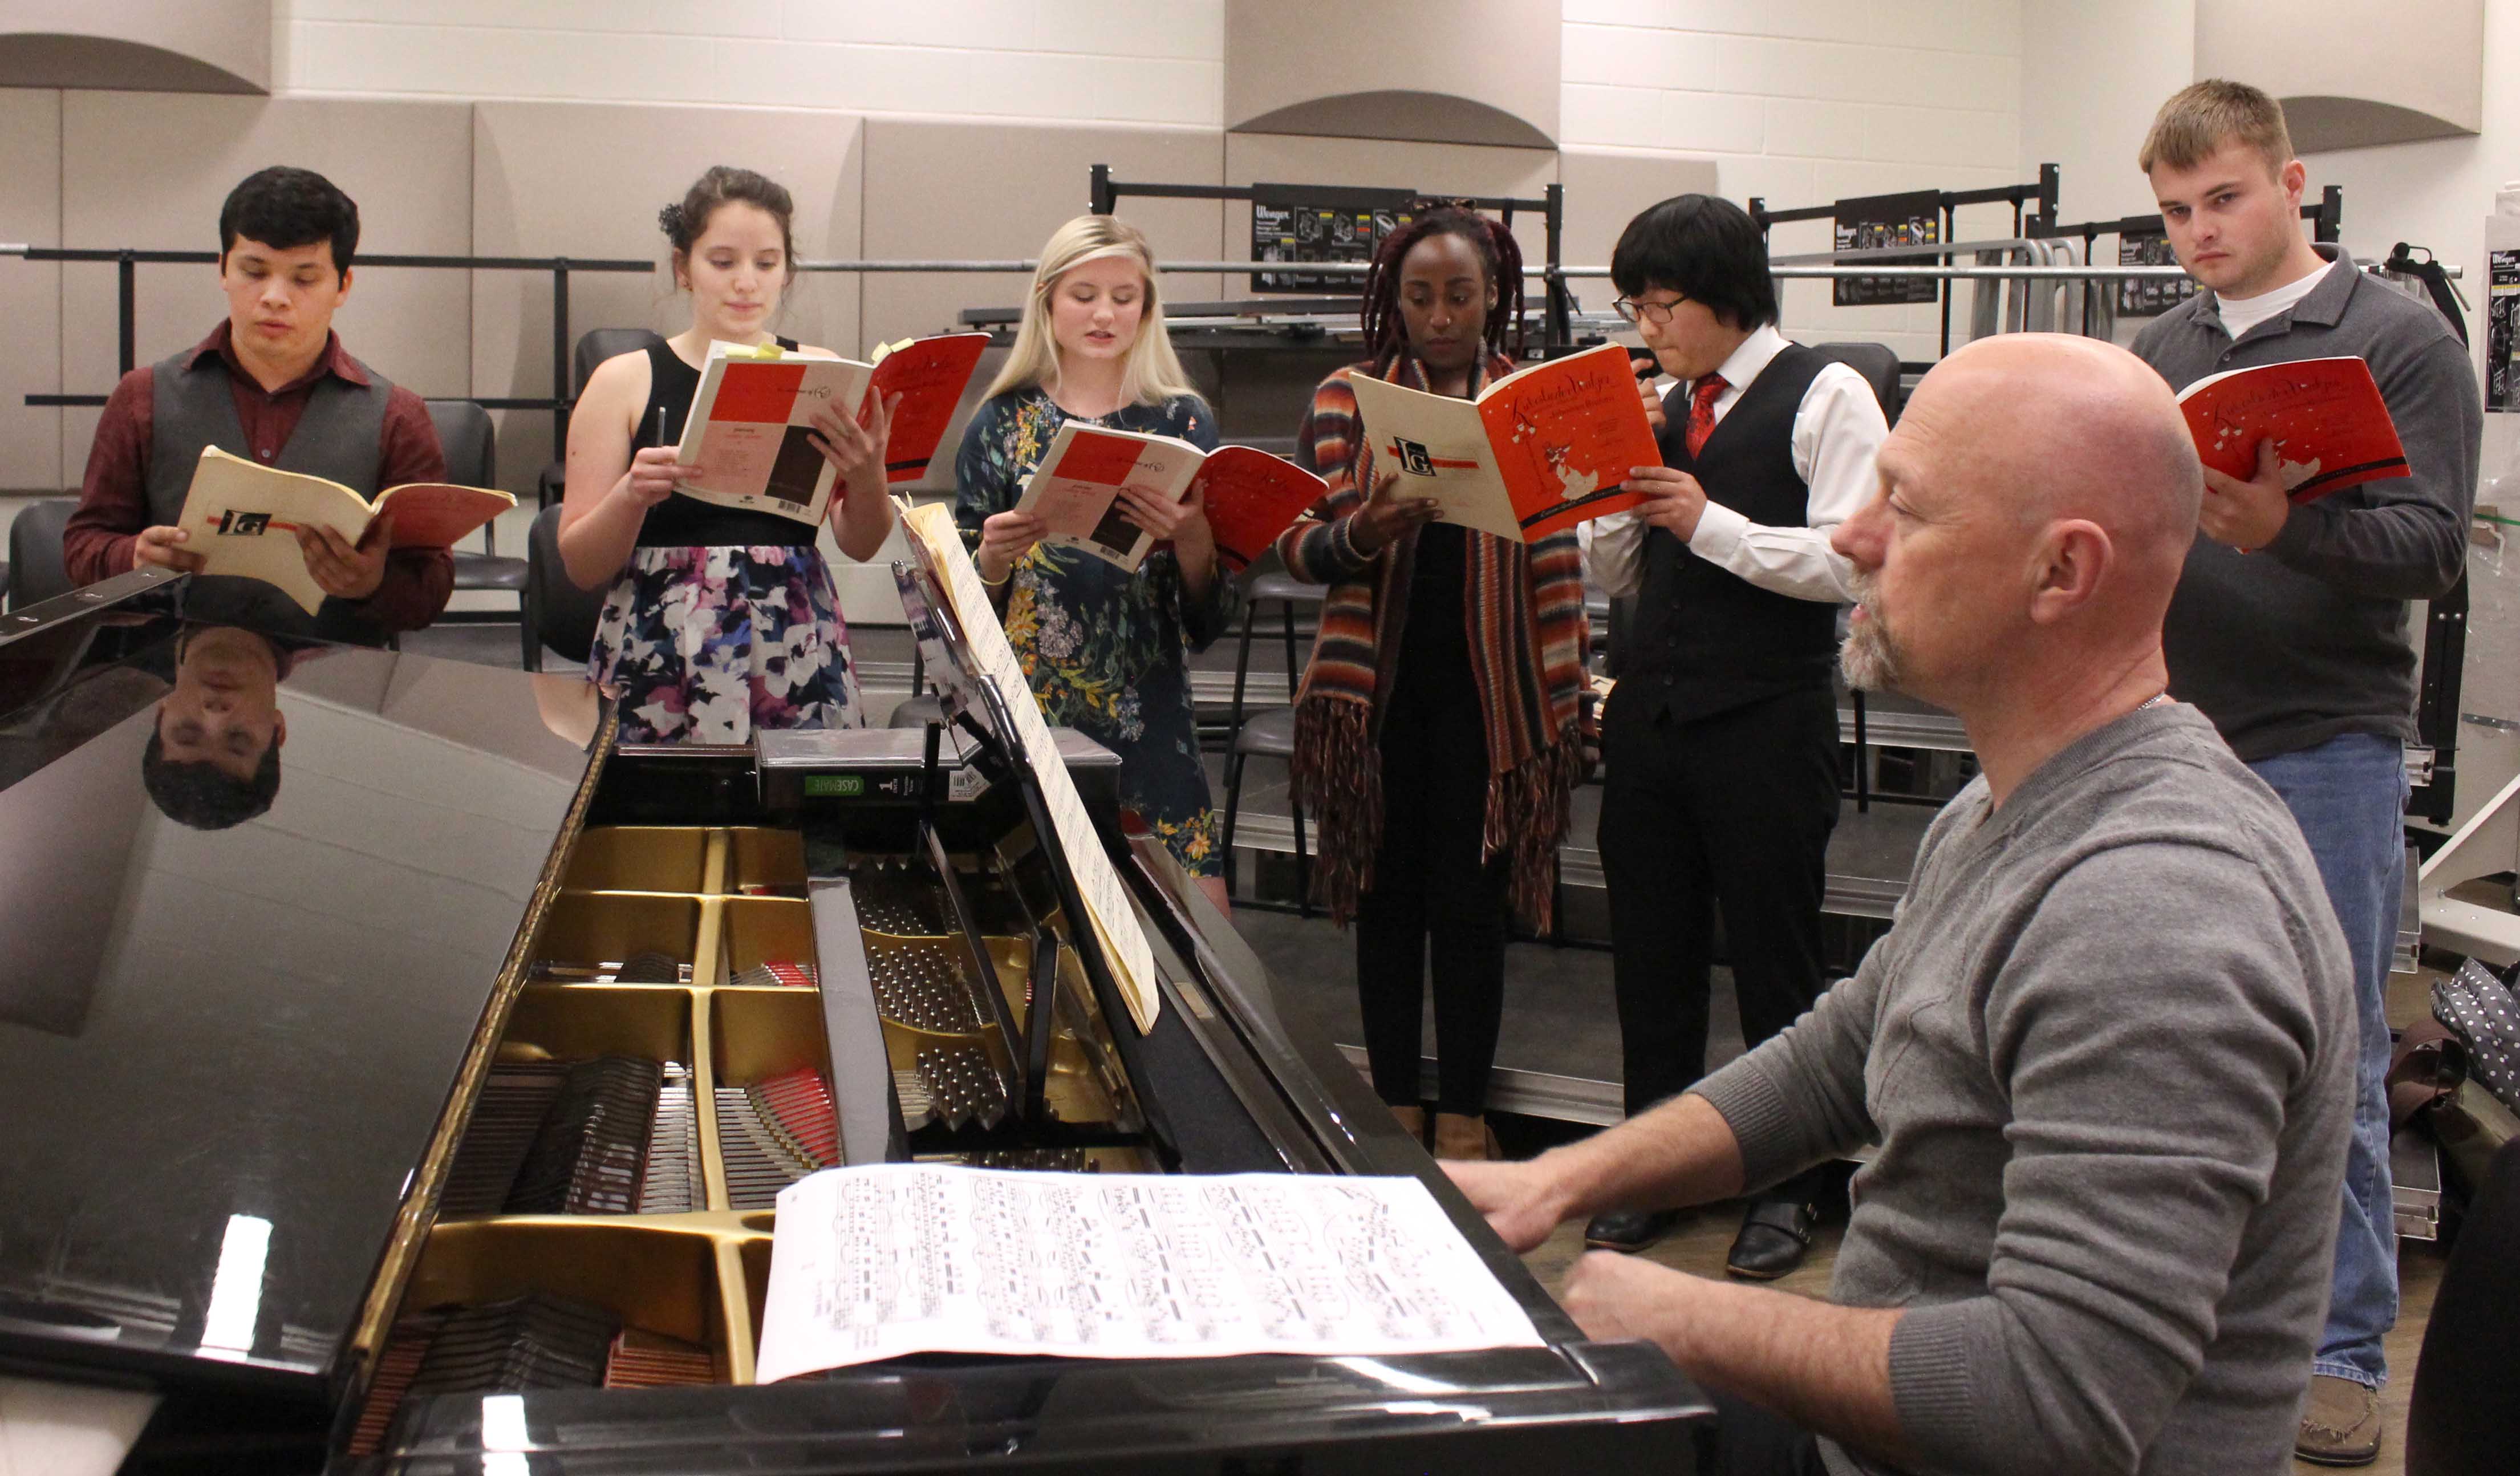 NE music instructor and choir director Stan Paschal works with students as they learn their parts for a song they will perform during the Dessert Theater.